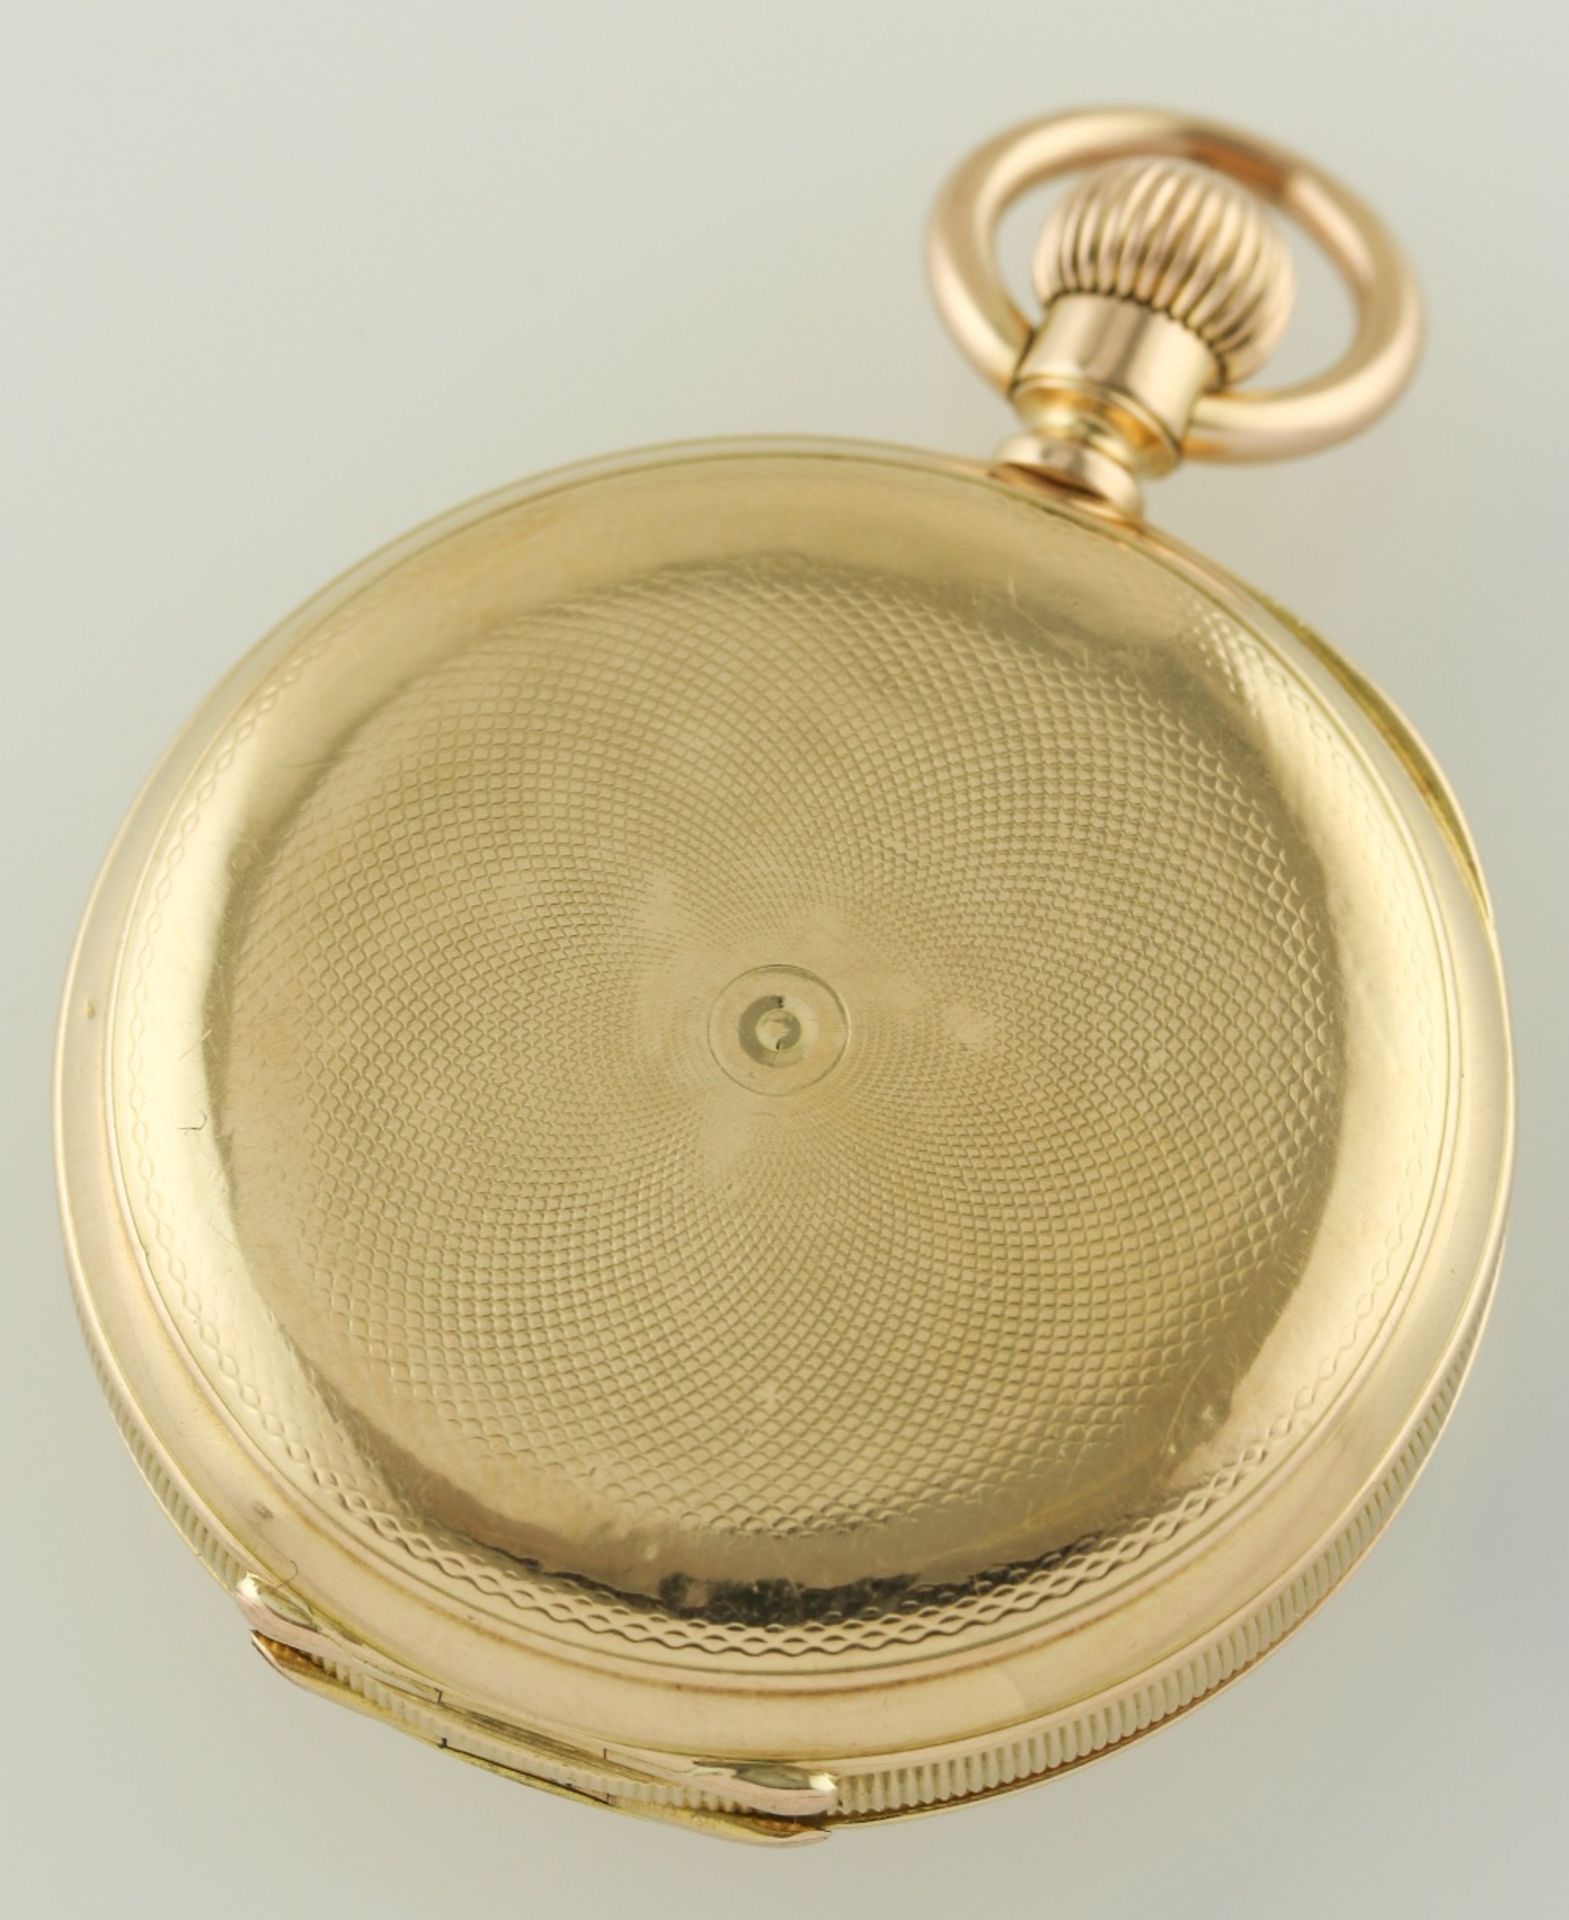 A LADIES 18K SOLID GOLD PATEK PHILIPPE HALF HUNTER POCKET WATCH CIRCA 1910, REF. 67120 MADE FOR A. - Image 3 of 9